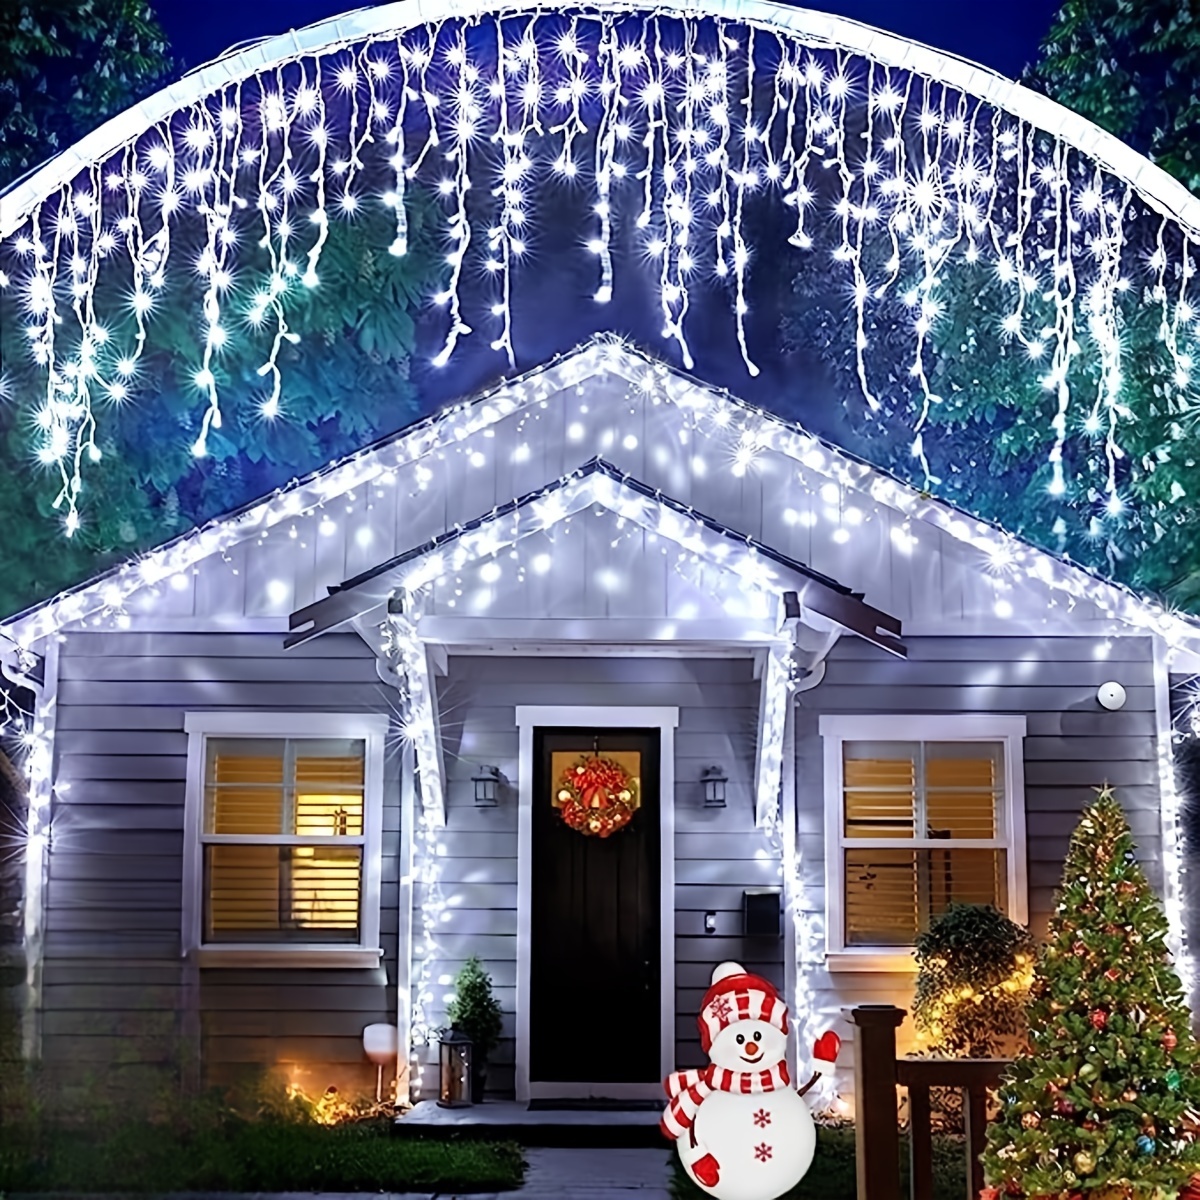 1pc icicle string light 8 modes waterproof usb powered led twinkle lights for patio garden tree fence yard party christmas holiday decorations details 1